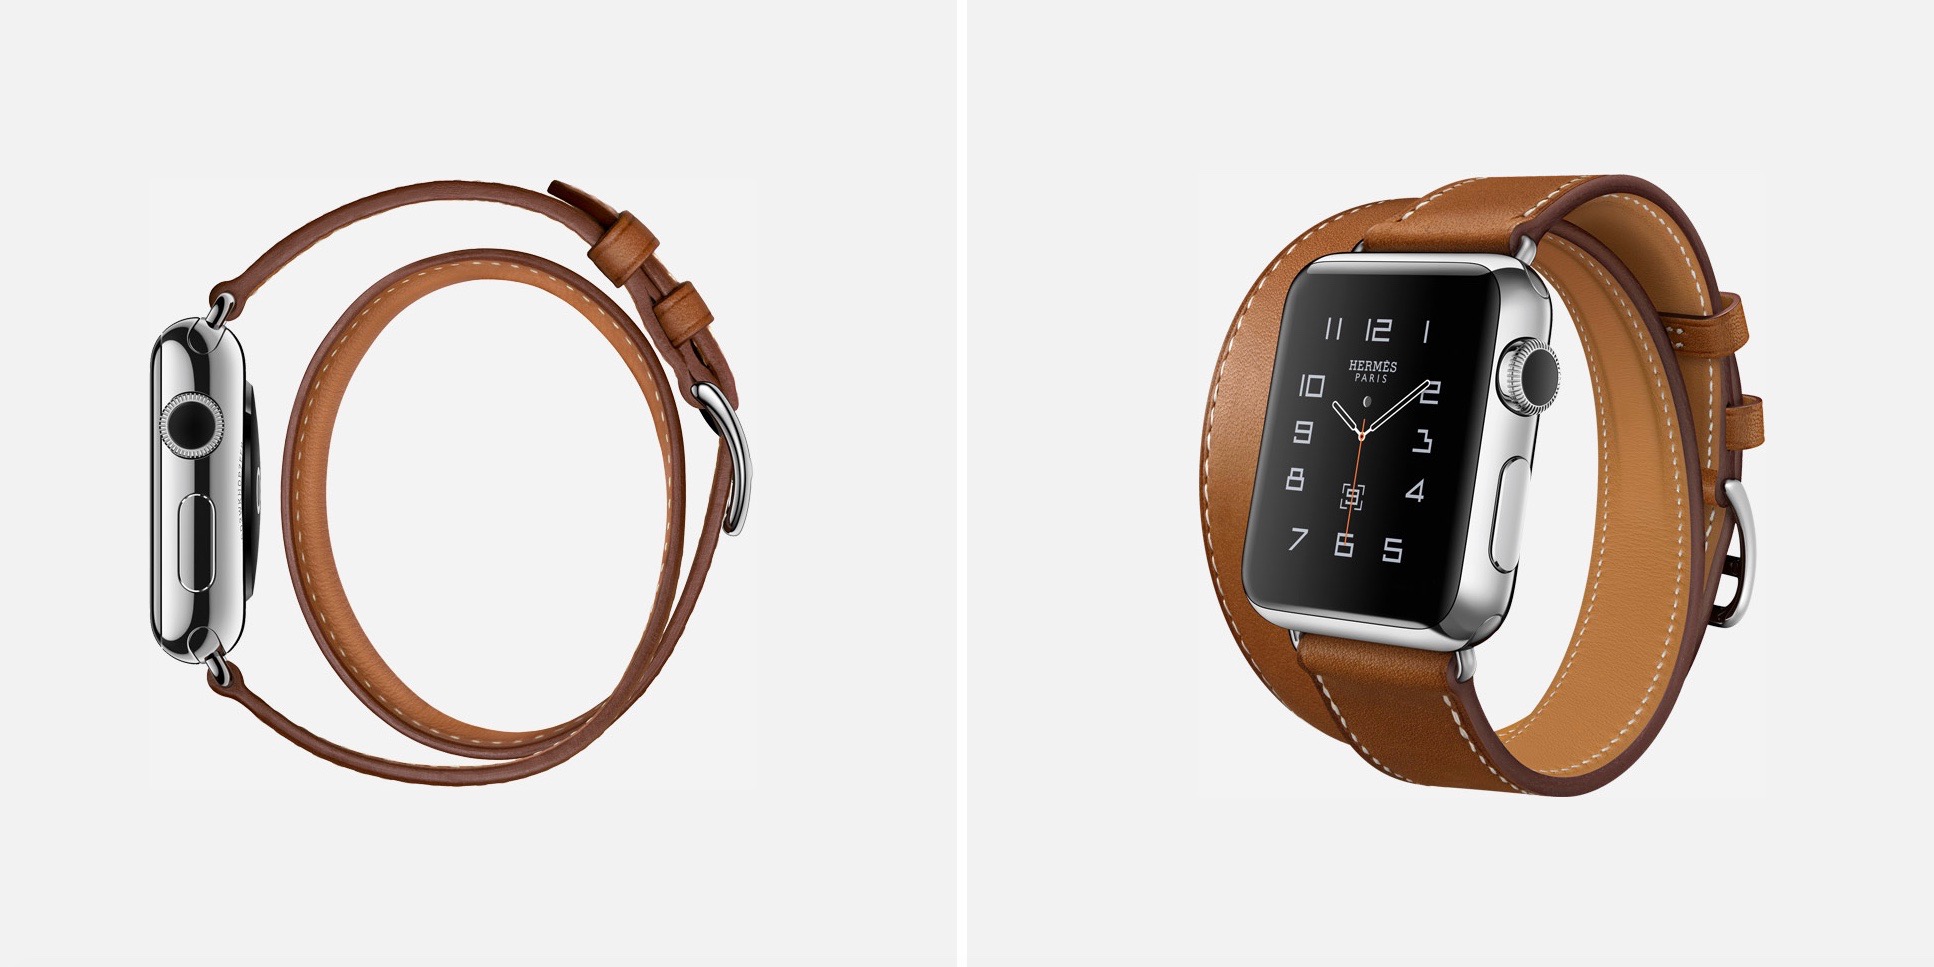 Apple Watch Hermès collection now available online after initial